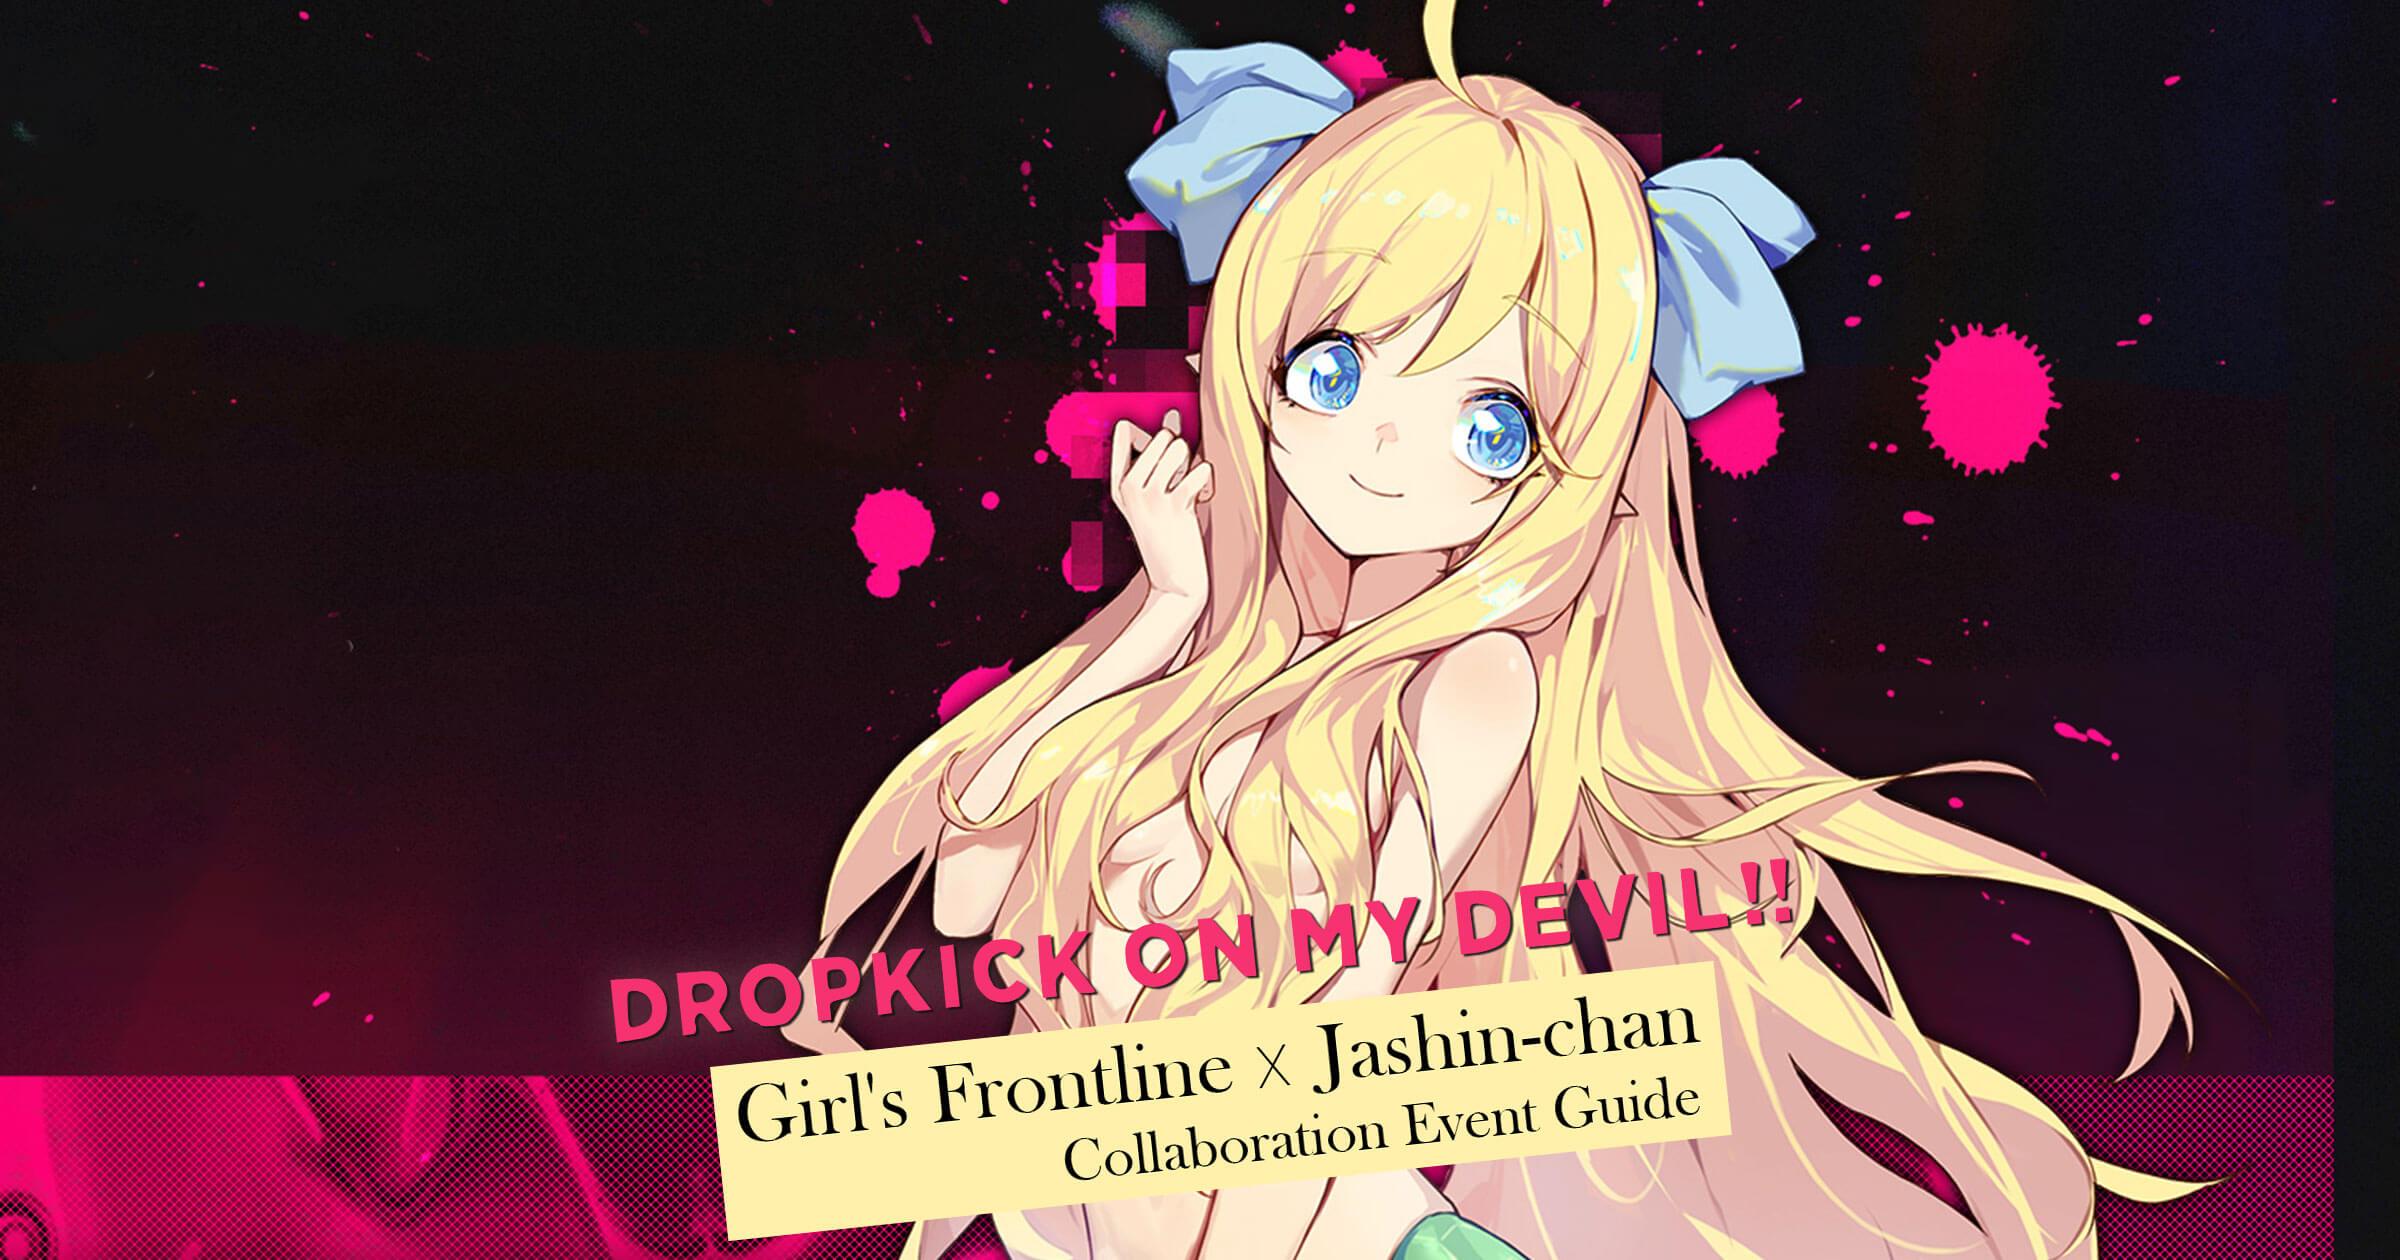 Event information and guides for the Girls' Frontline  x Jashin-Chan "My Devil's Frontline" Guides & Event Info